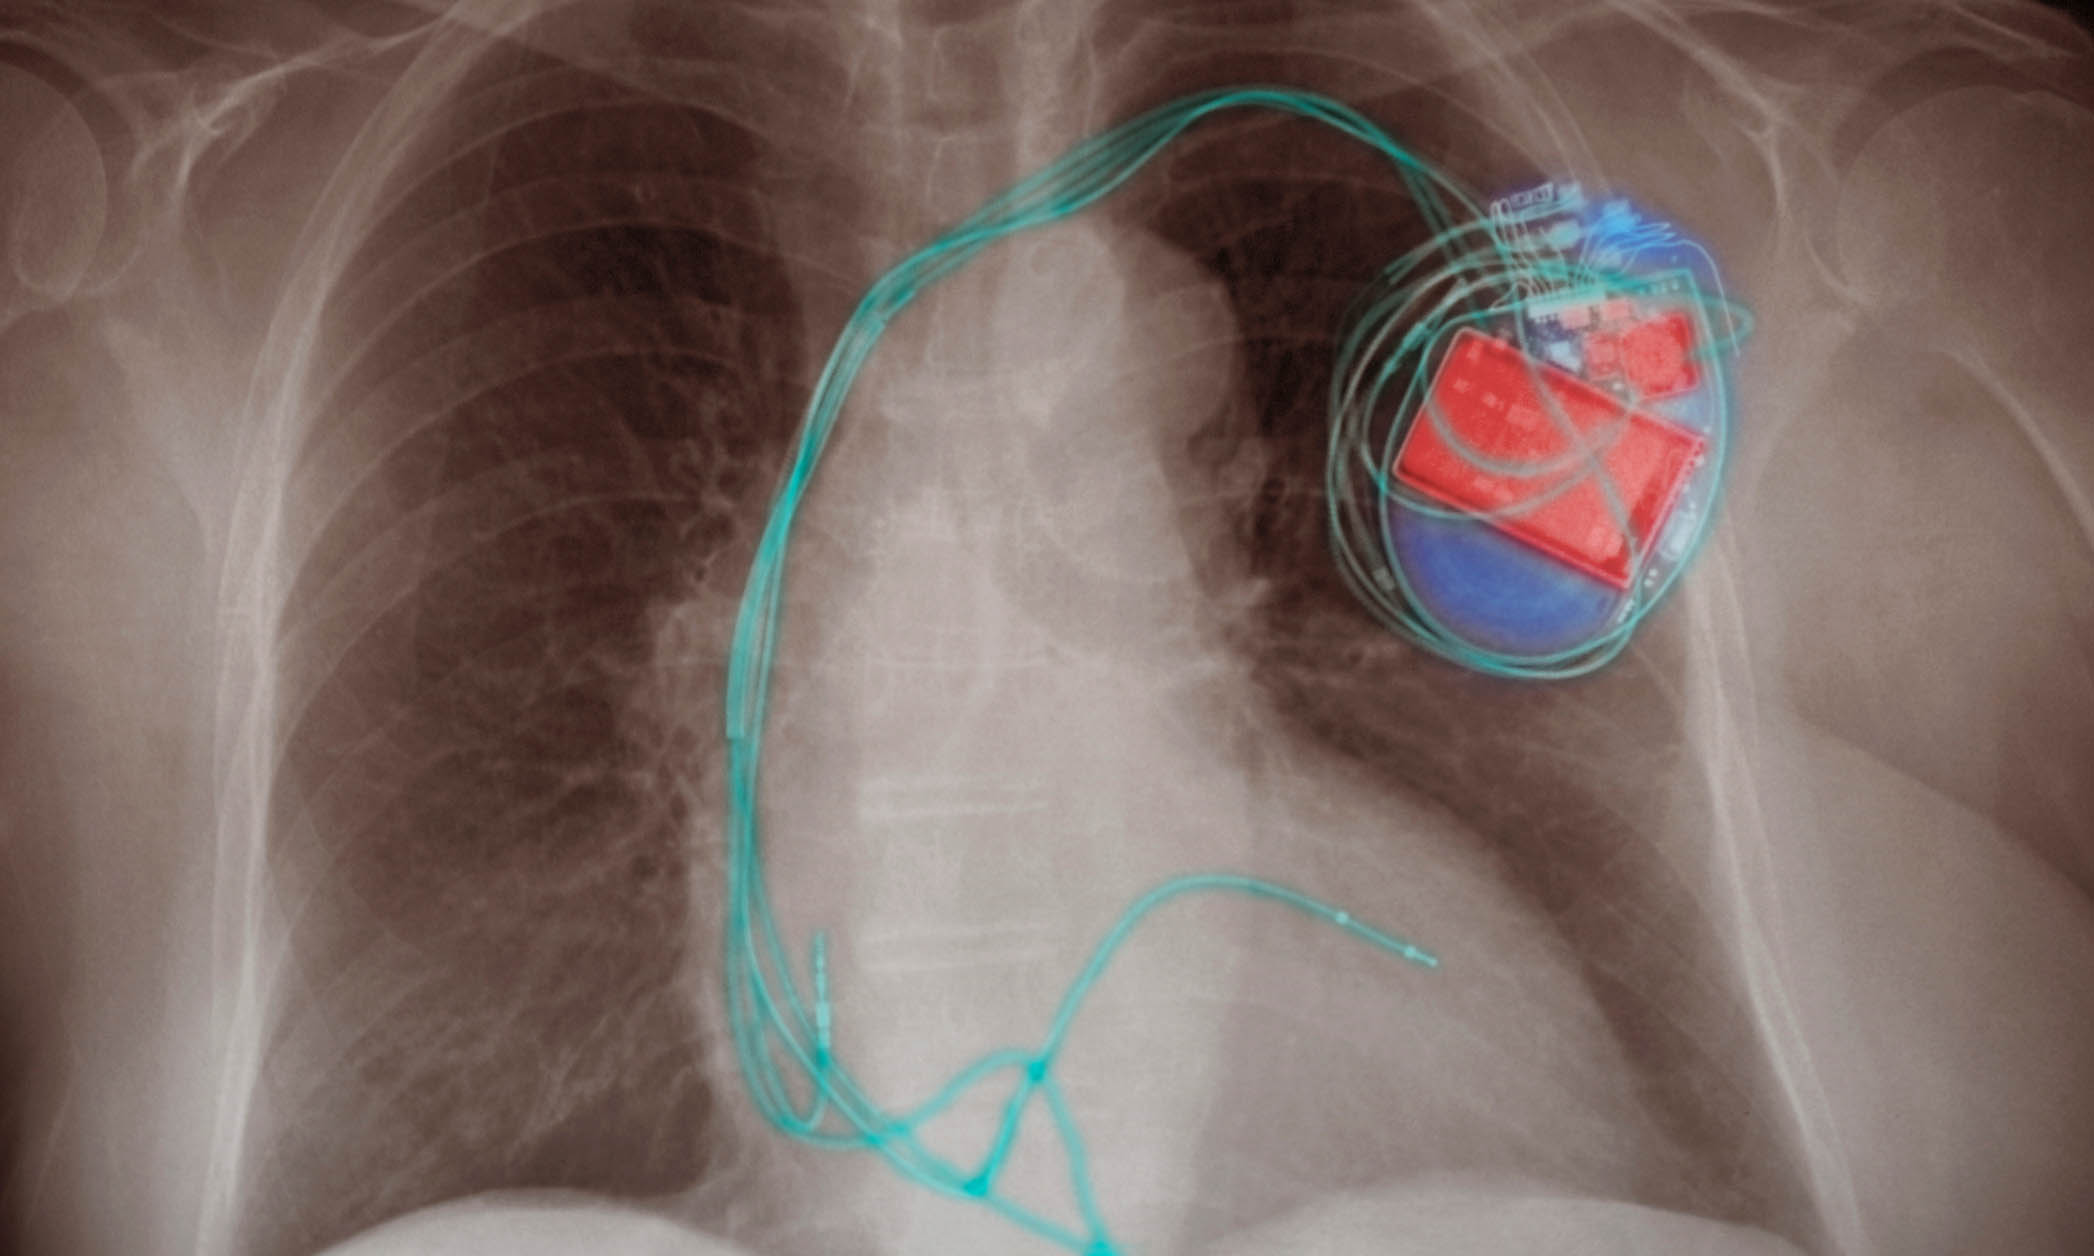 convert blood pressure into a power source for pacemakers